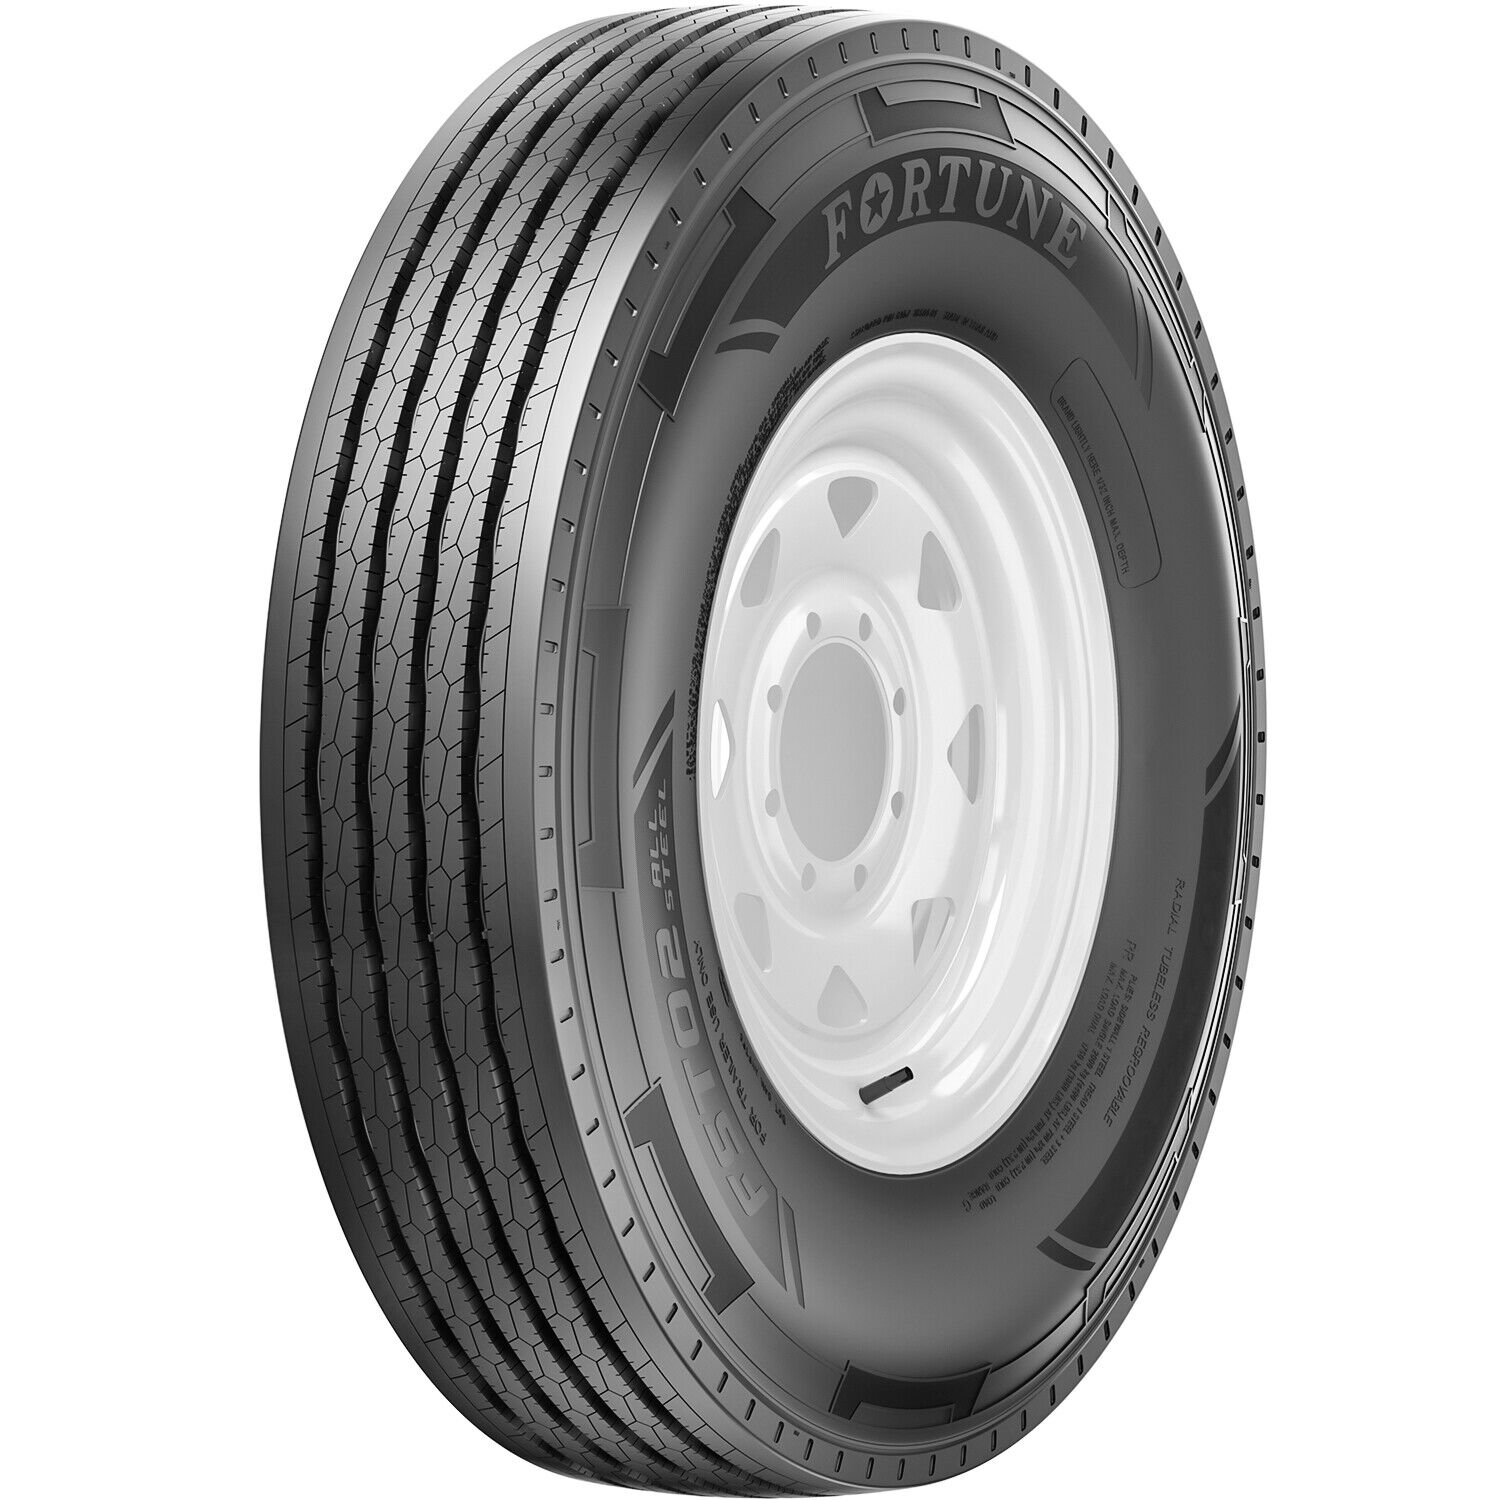 2 Tires Fortune FST02 All Steel ST 235/85R16 Load G 14 Ply Trailer